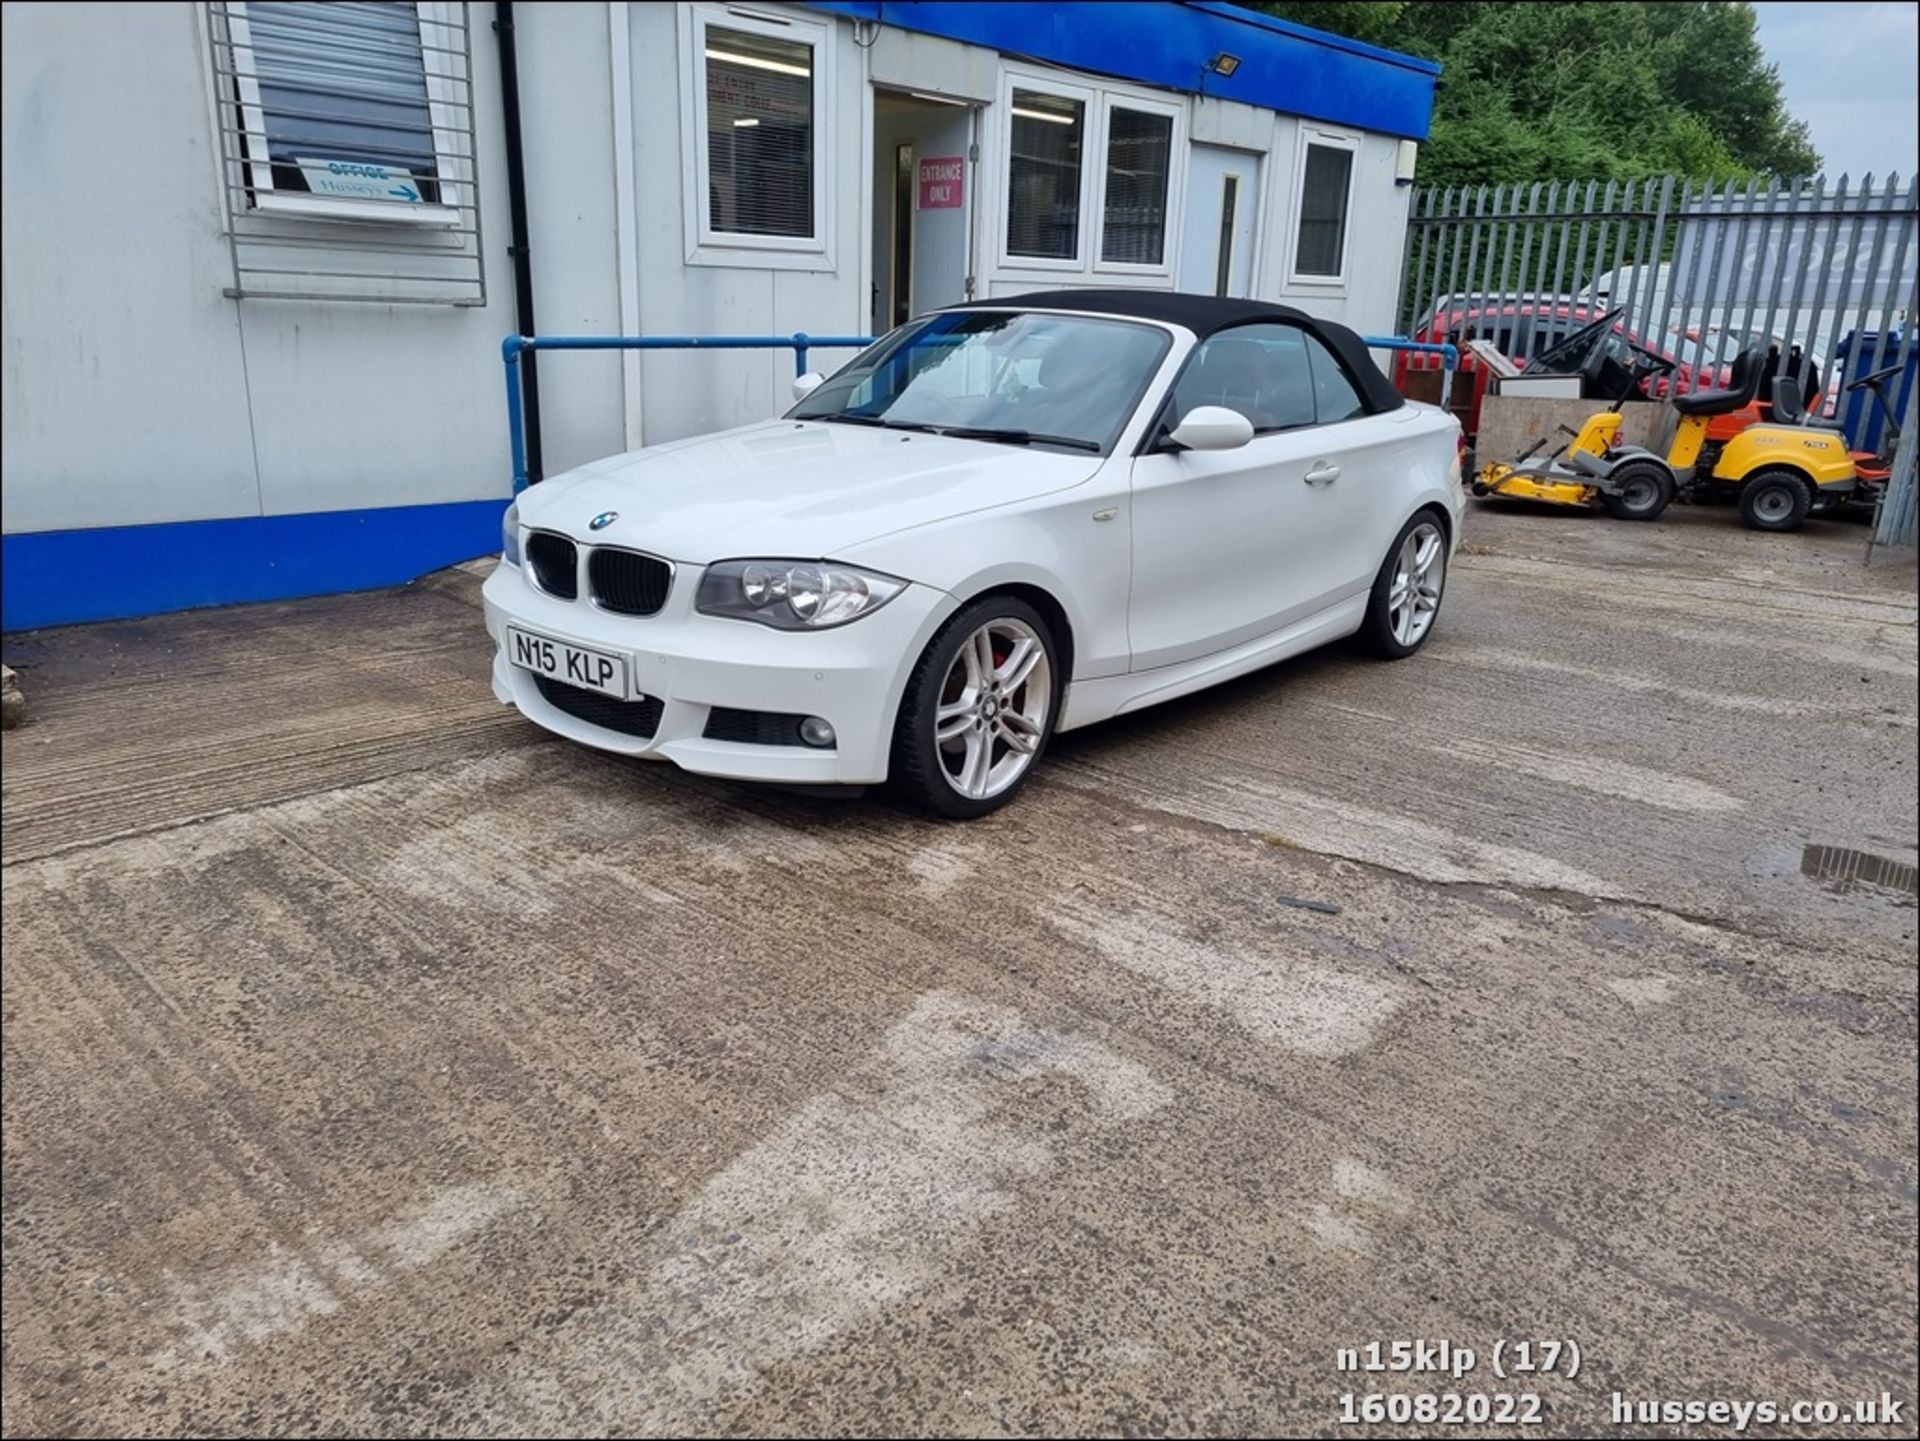 2008 BMW 118I M SPORT - 1995cc 2dr Convertible (White, 97k) - Image 17 of 19